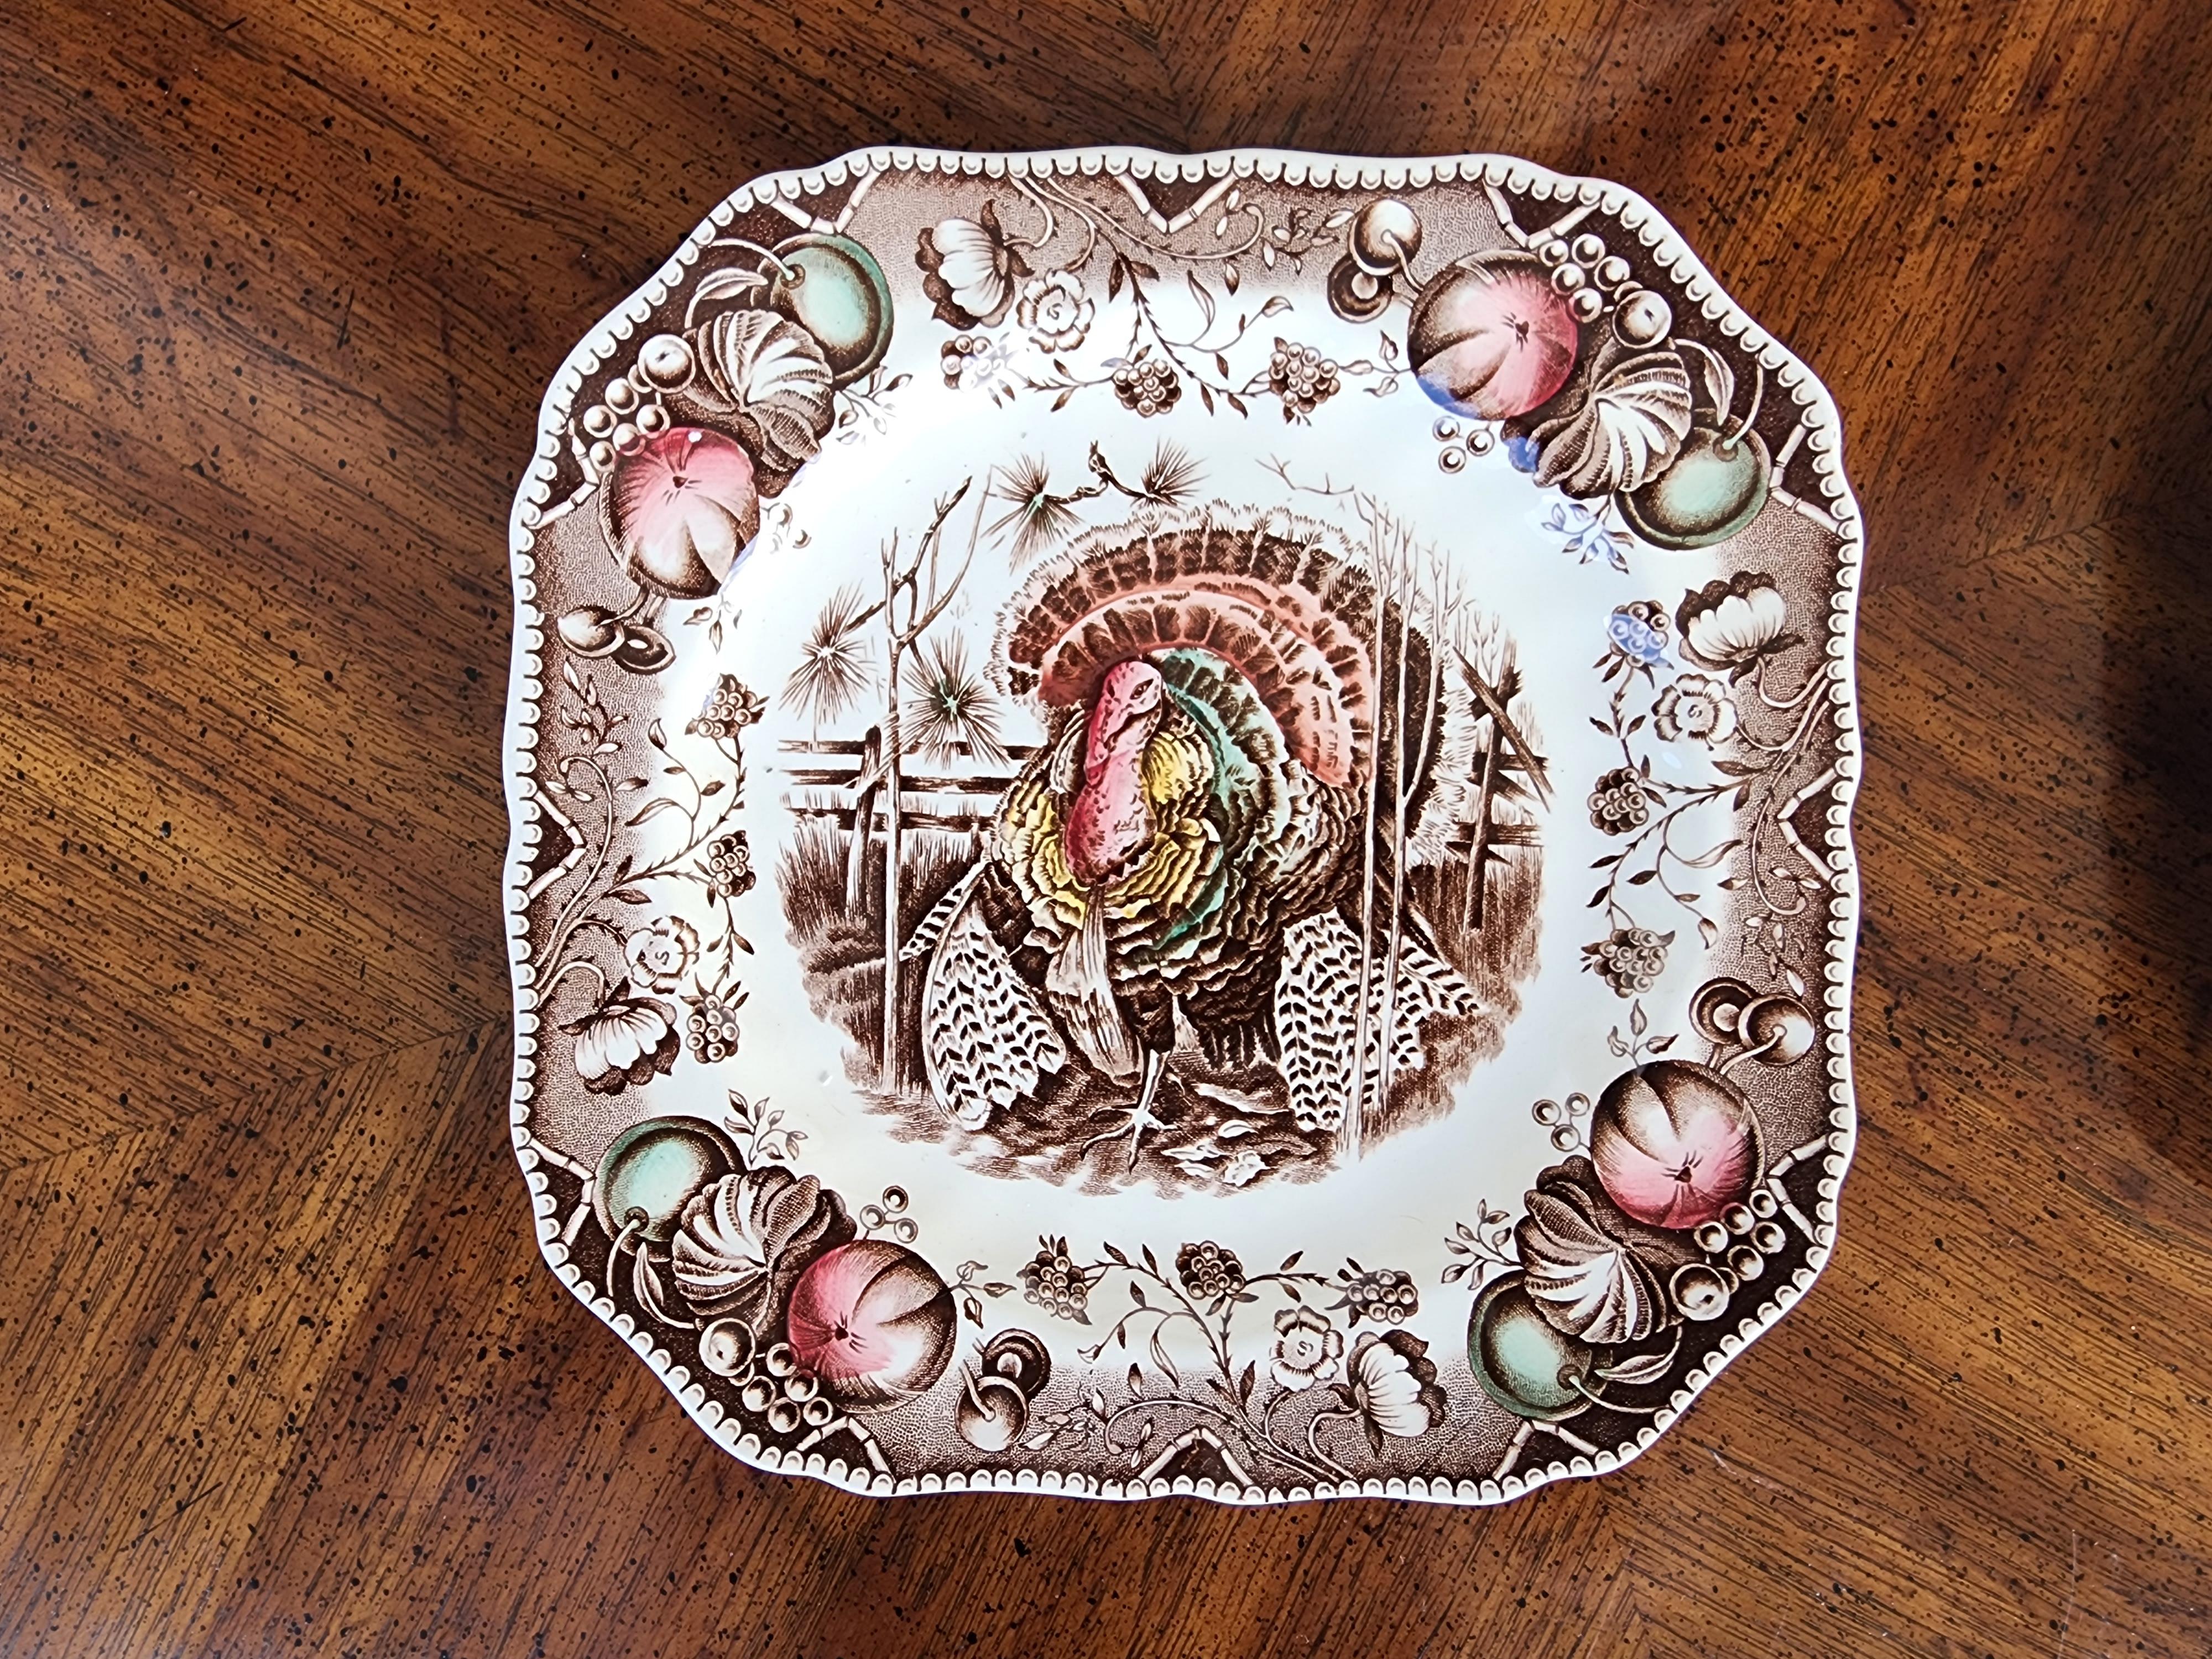 For FULL item description click on CONTINUE READING at the bottom of this page.

Offering One Of Our Recent Palm Beach Estate Fine Dinnerware Acquisitions Of A
Rare Set of 14 Johnson Bros His Majesty Turkey Square Dessert Salad Plates 7 3/4